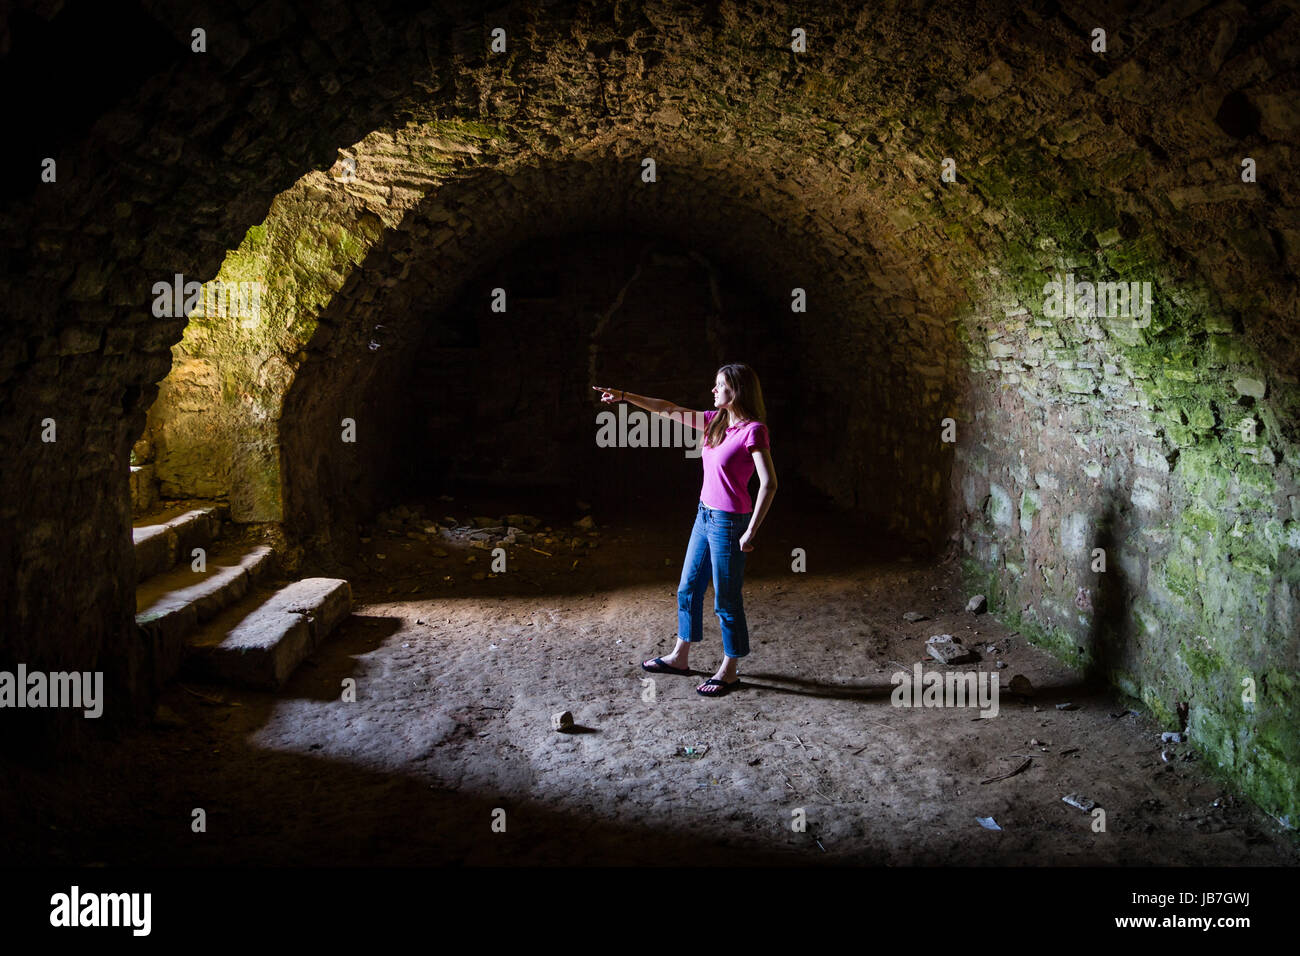 Pretty young girl stands in a masoned tunnel in the cellar of a medival castle and points up stairs into incident light.<a href="http://de.wikipedia.org/wiki/Burg_Lohra" target="_blank">Burg Lohra</a> Großlohra, Thuringia, Germany Stock Photo